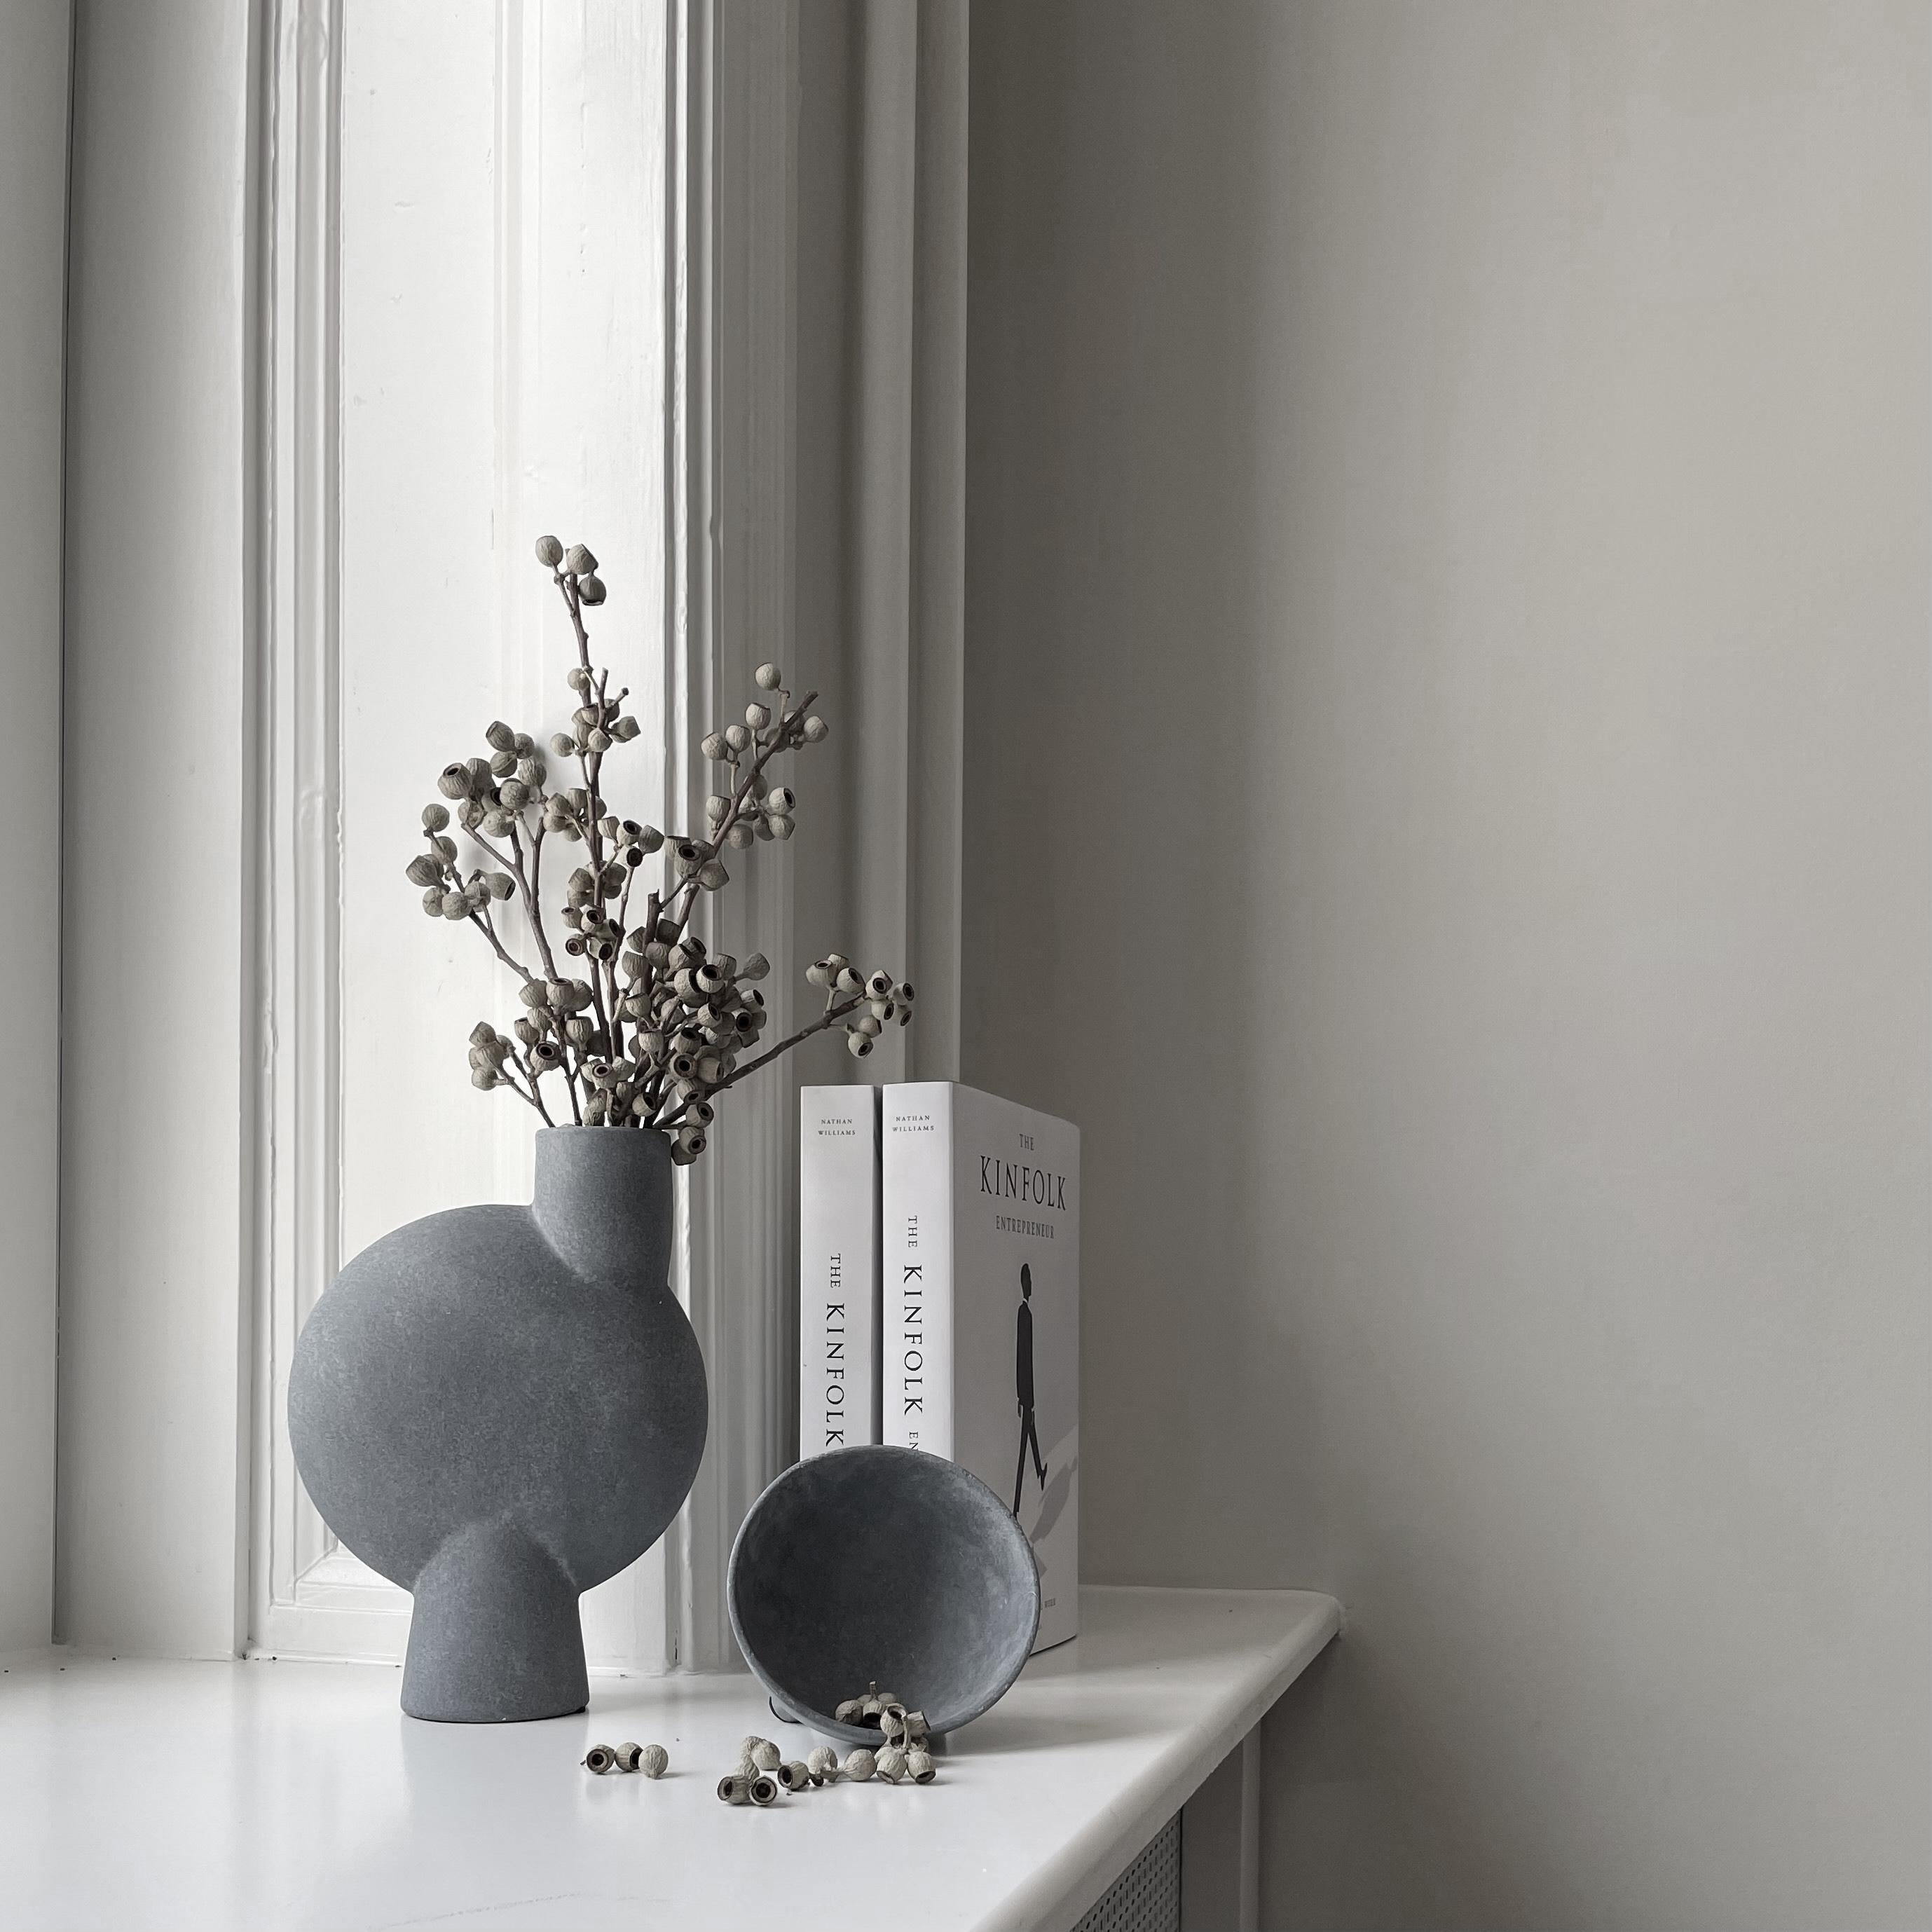 A set of 4 ocher Medio sphere vase Bubl by 101 Copenhagen
Designed by Kristian Sofus Hansen & Tommy Hyldahl
Dimensions: L18 / W8 / H26 CM
Materials: Ceramic

The Sphere collection celebrates unique silhouettes and textures that makes an impact